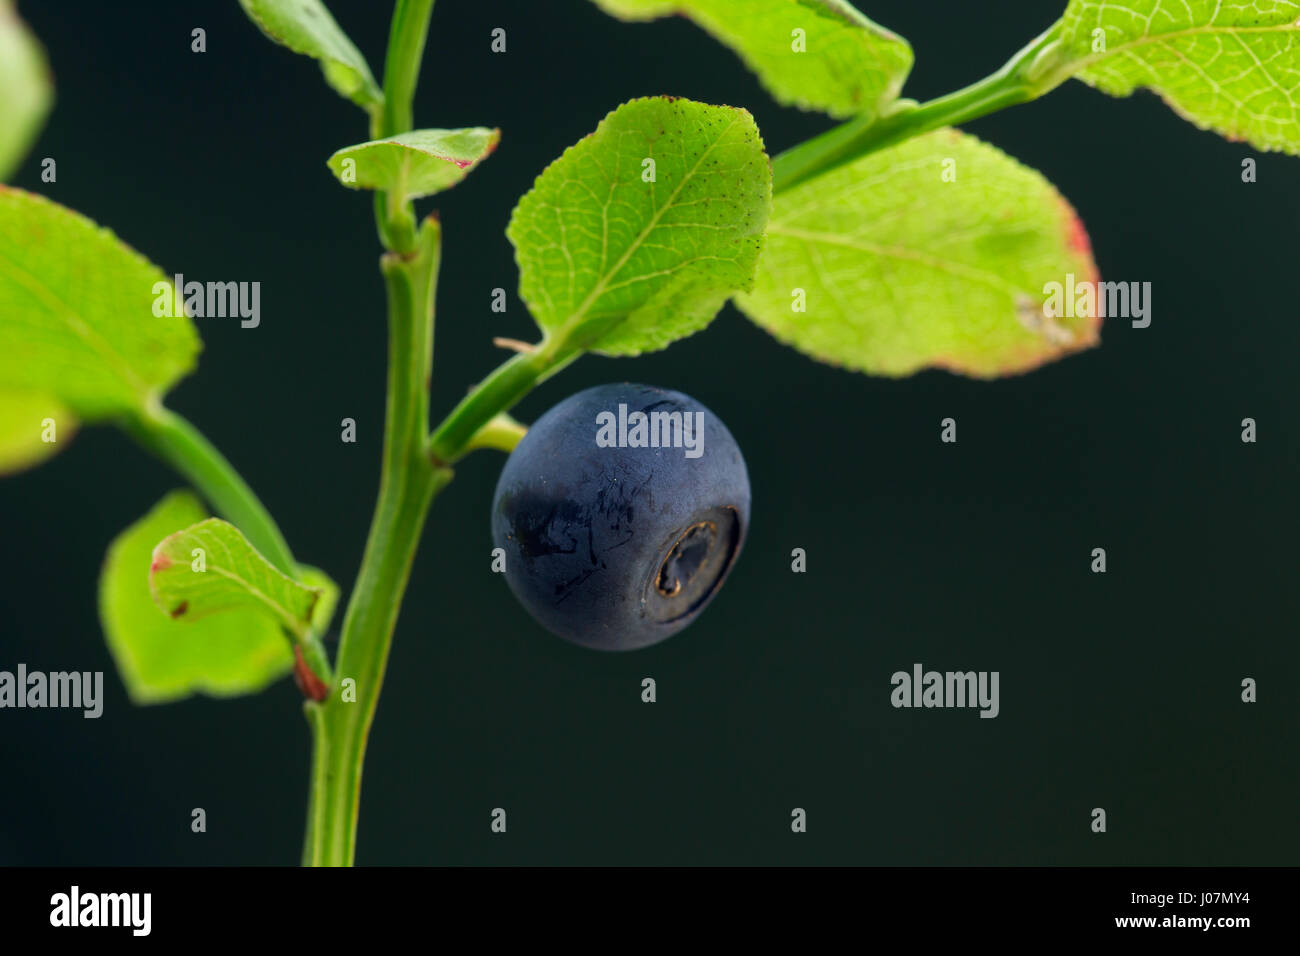 European blueberry / bilberry / whortleberry (Vaccinium myrtillus), close up of leaves and berry Stock Photo